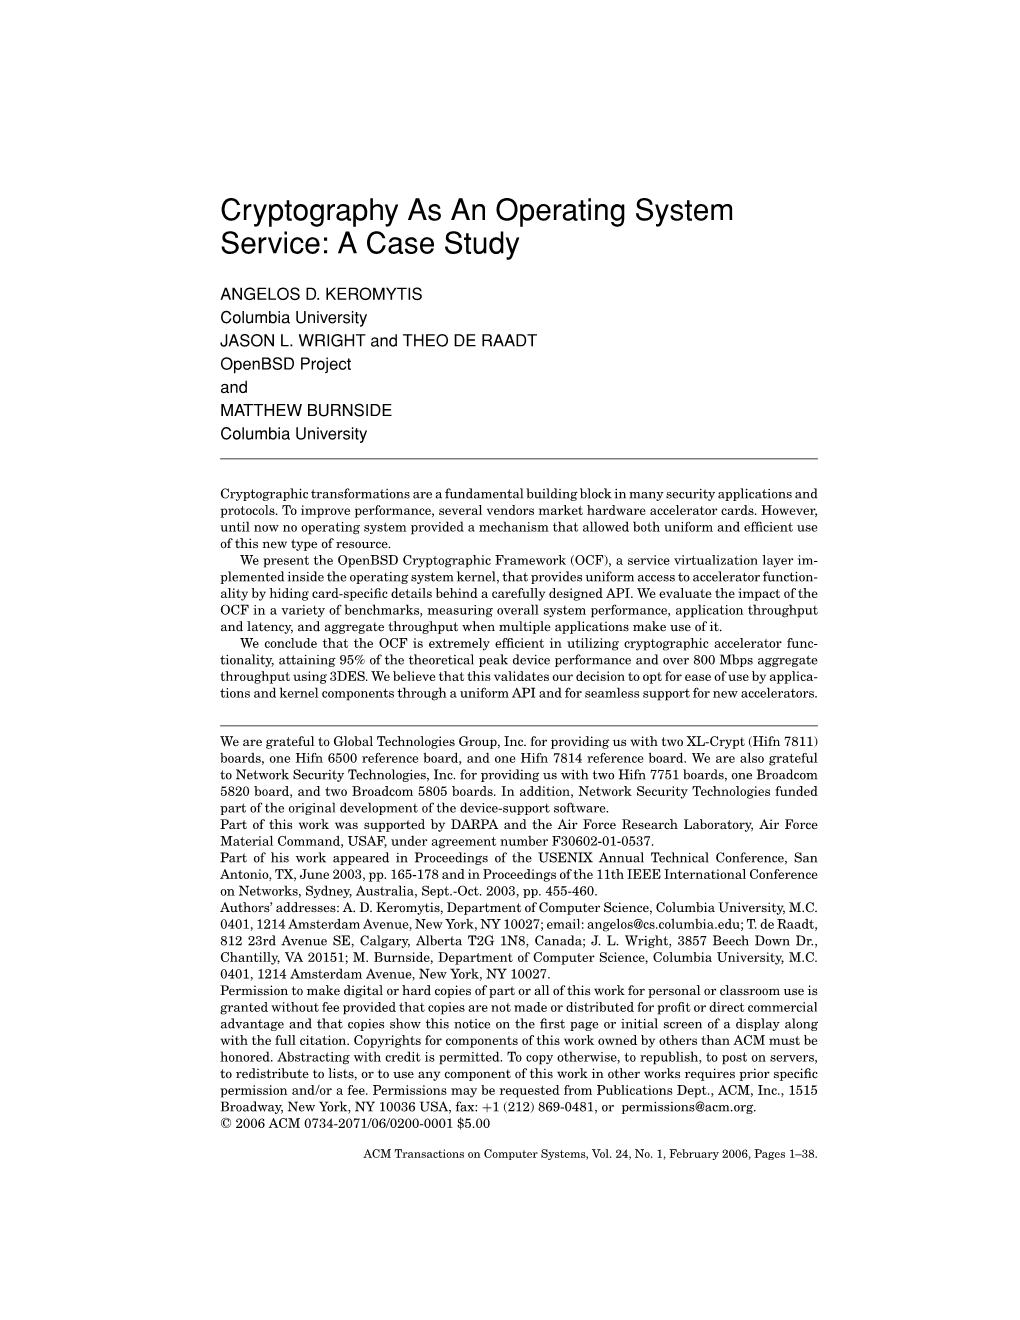 Cryptography As an Operating System Service: a Case Study